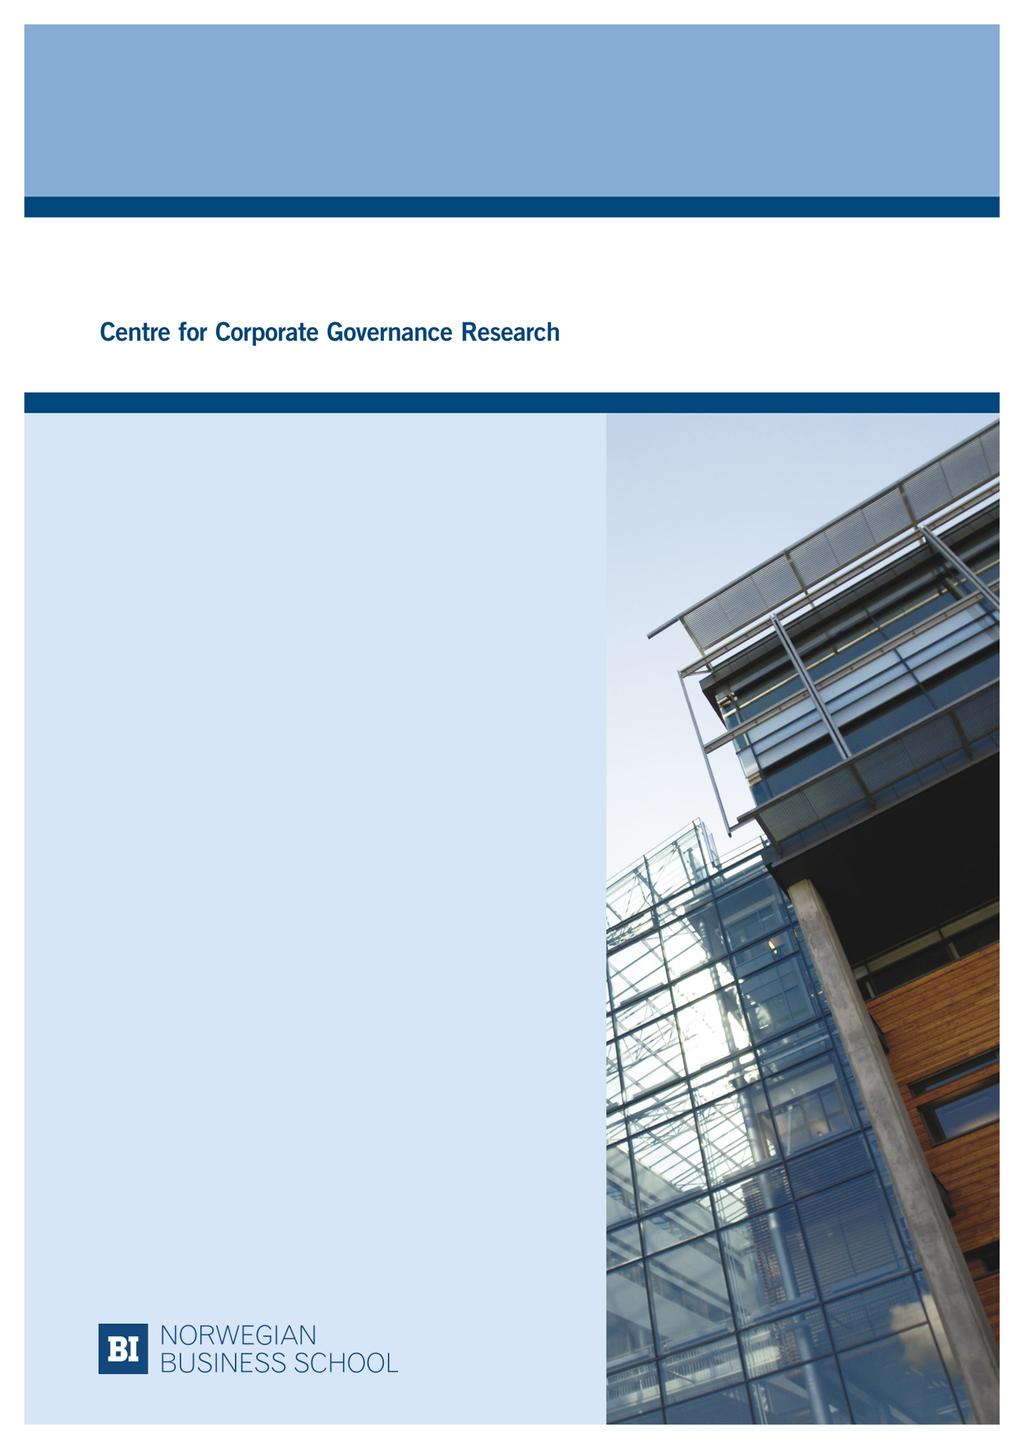 The Centre for Corporate Governance Research (CCGR) conducts research on the relationship between corporate governance, firm behavior, and stakeholder welfare.